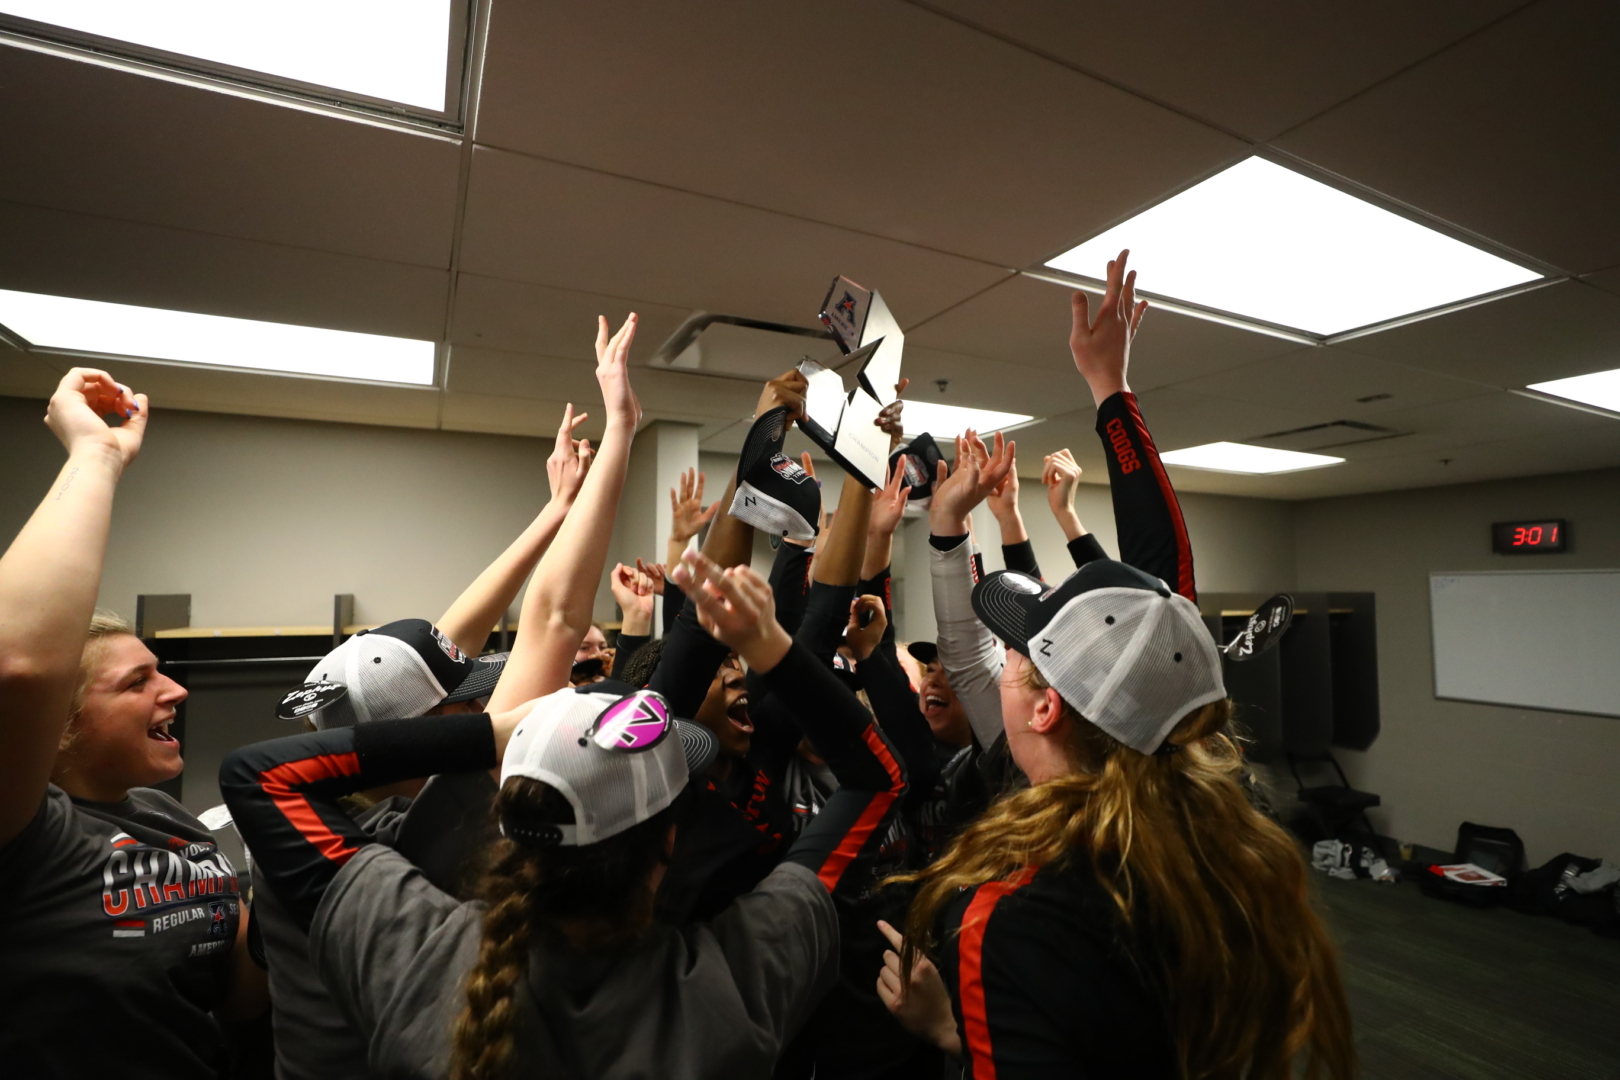 The UH volleyball team hoists their conference title trophy in their locker room. | Courtesy of UH athletics